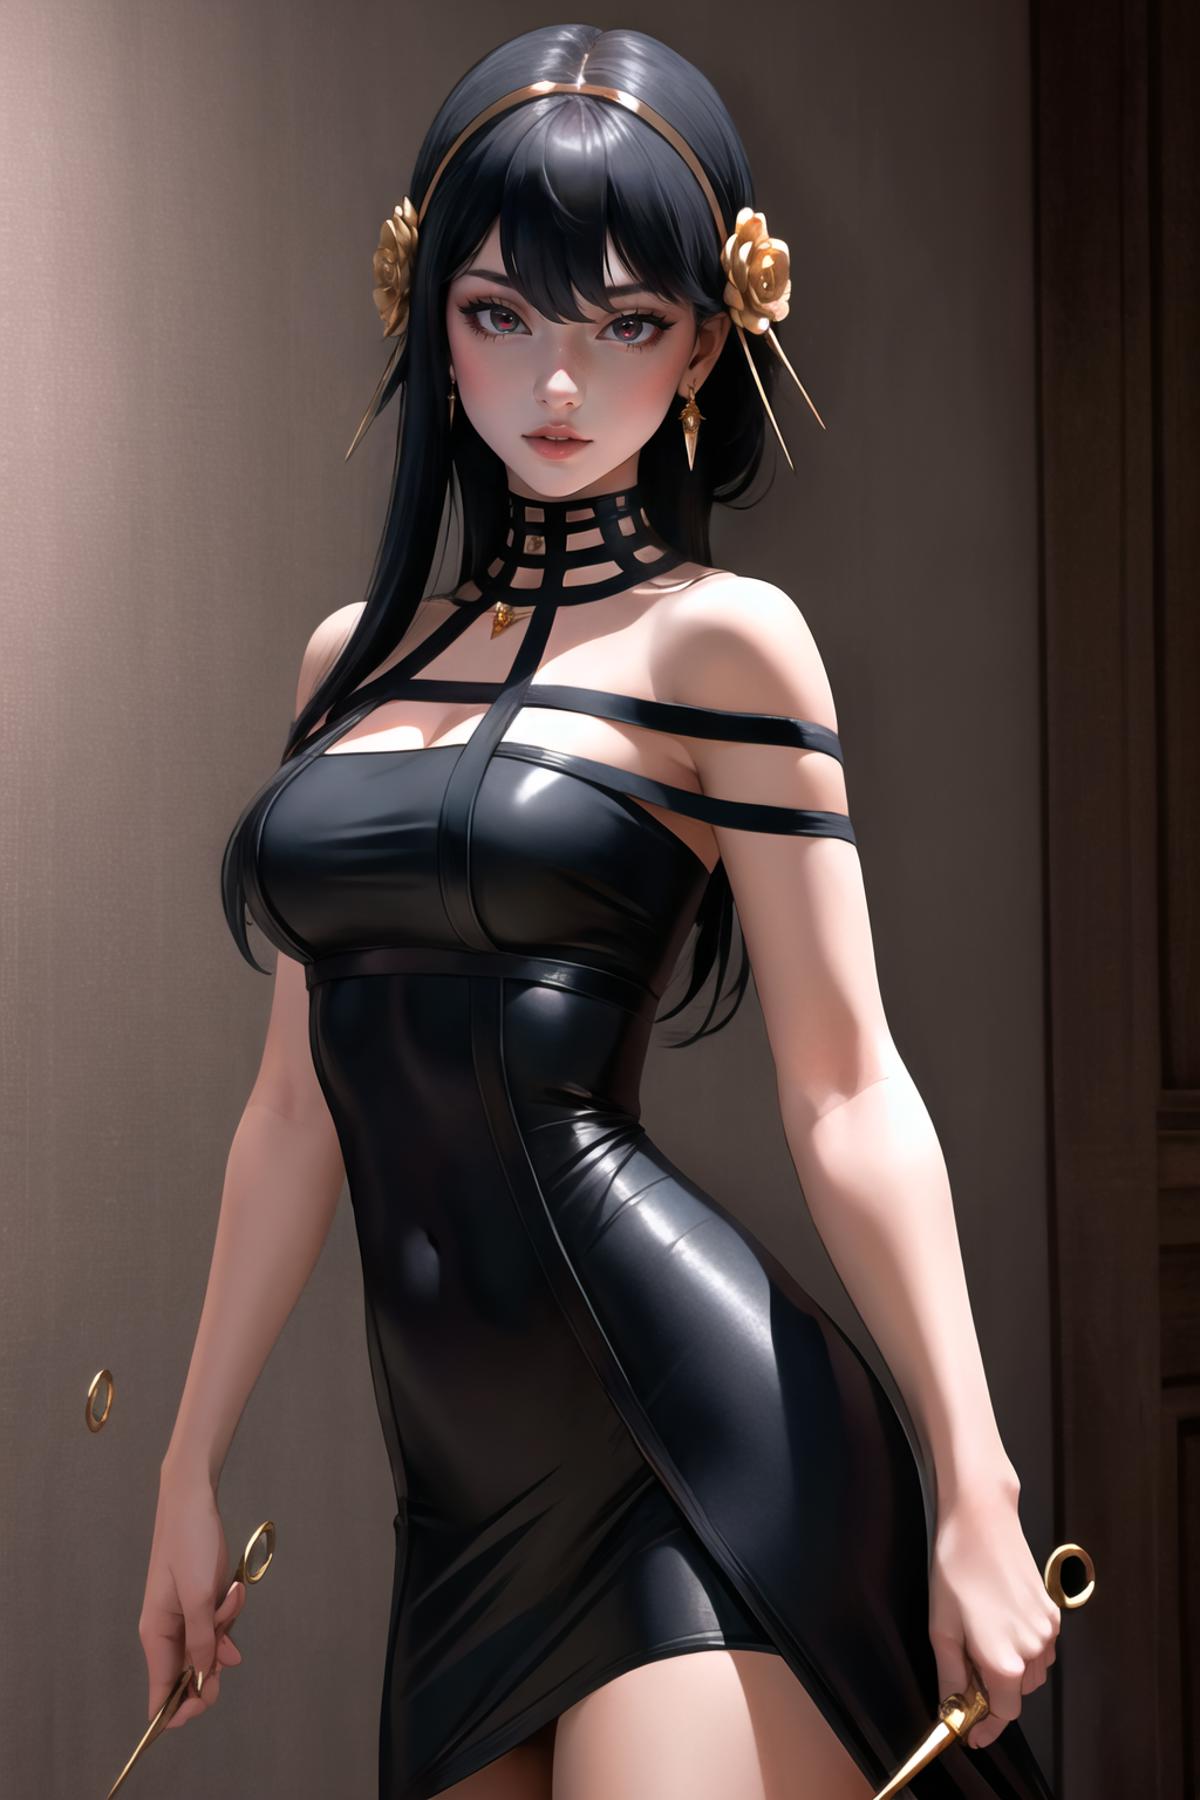 A 3D rendered image of a girl wearing a black dress with a gold necklace.